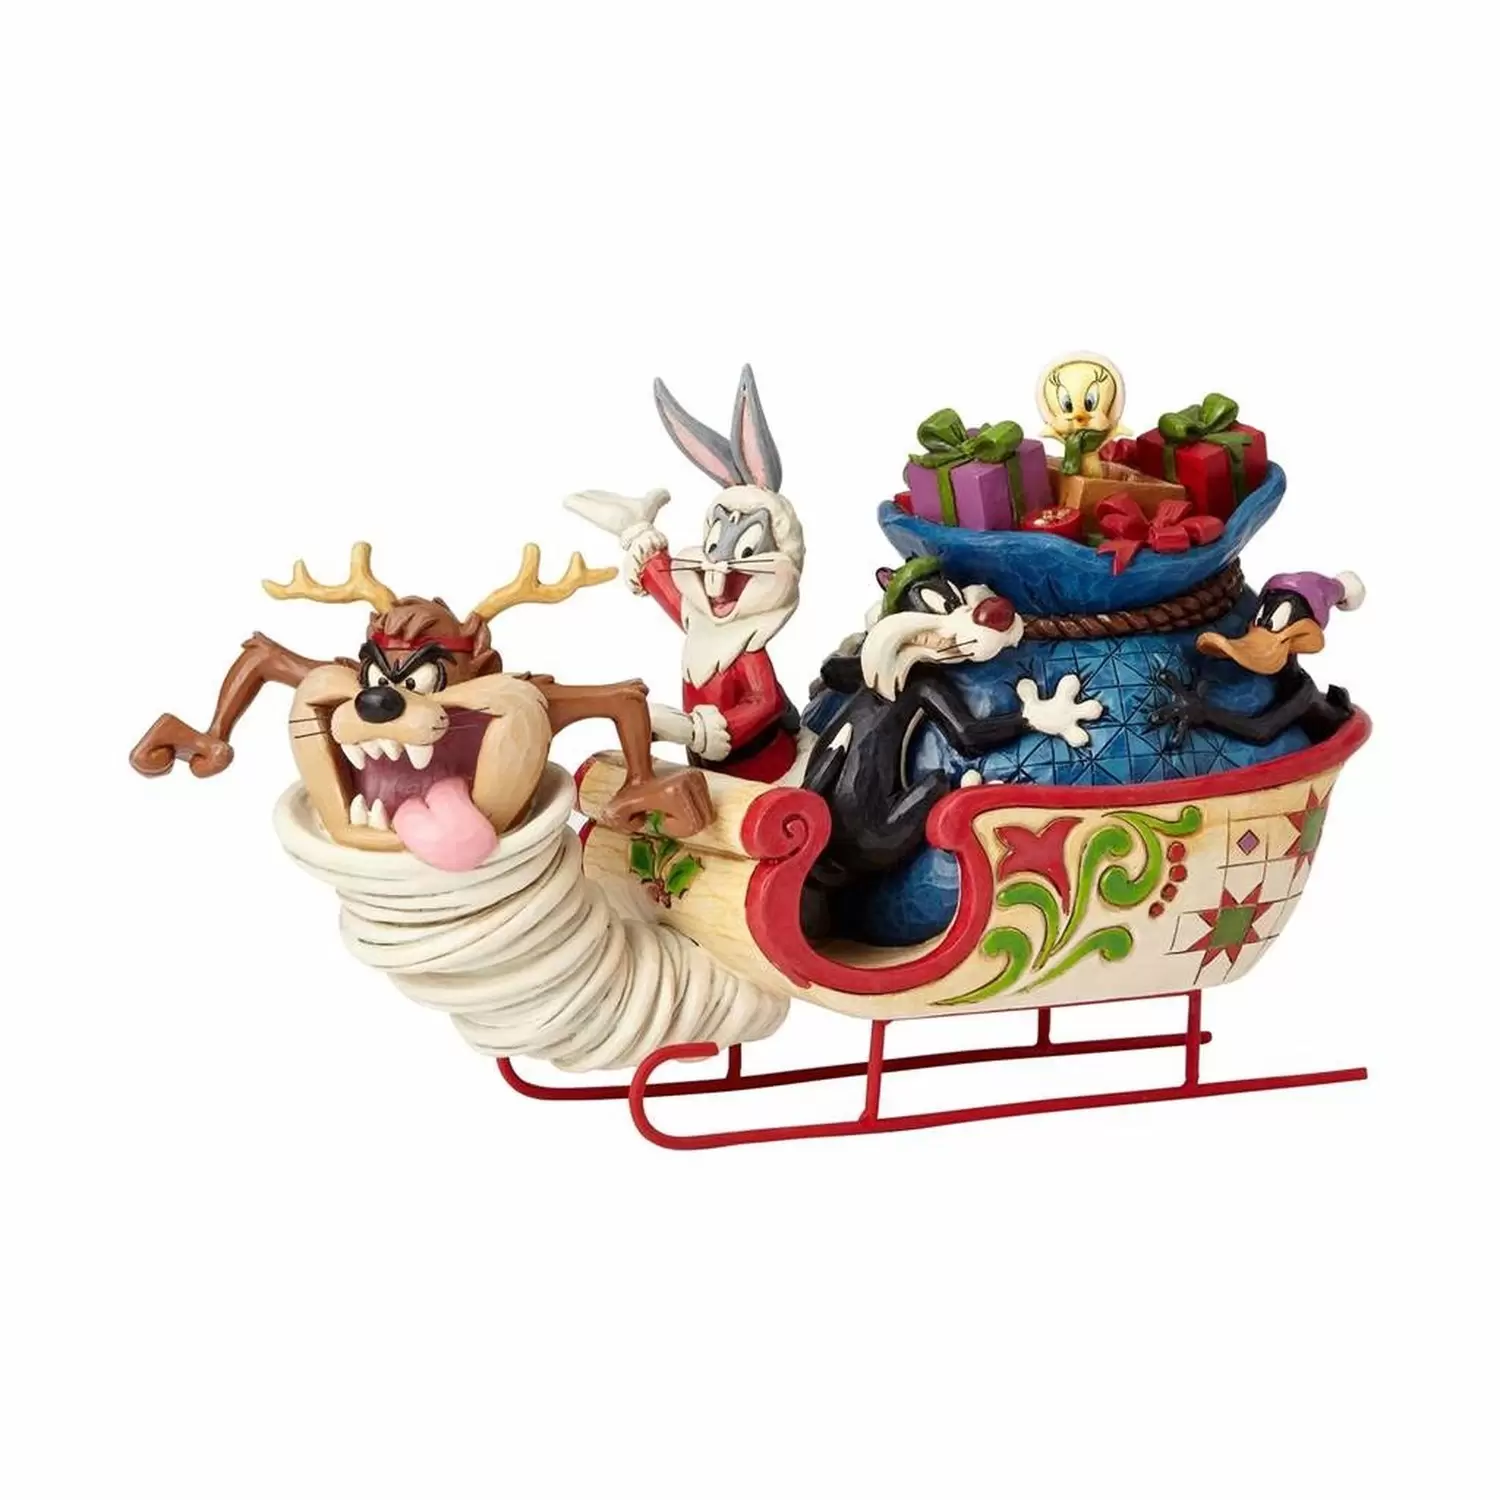 Looney Tunes characters by Jim Shore - Festive Flight - Looney Tunes Sleigh Ride